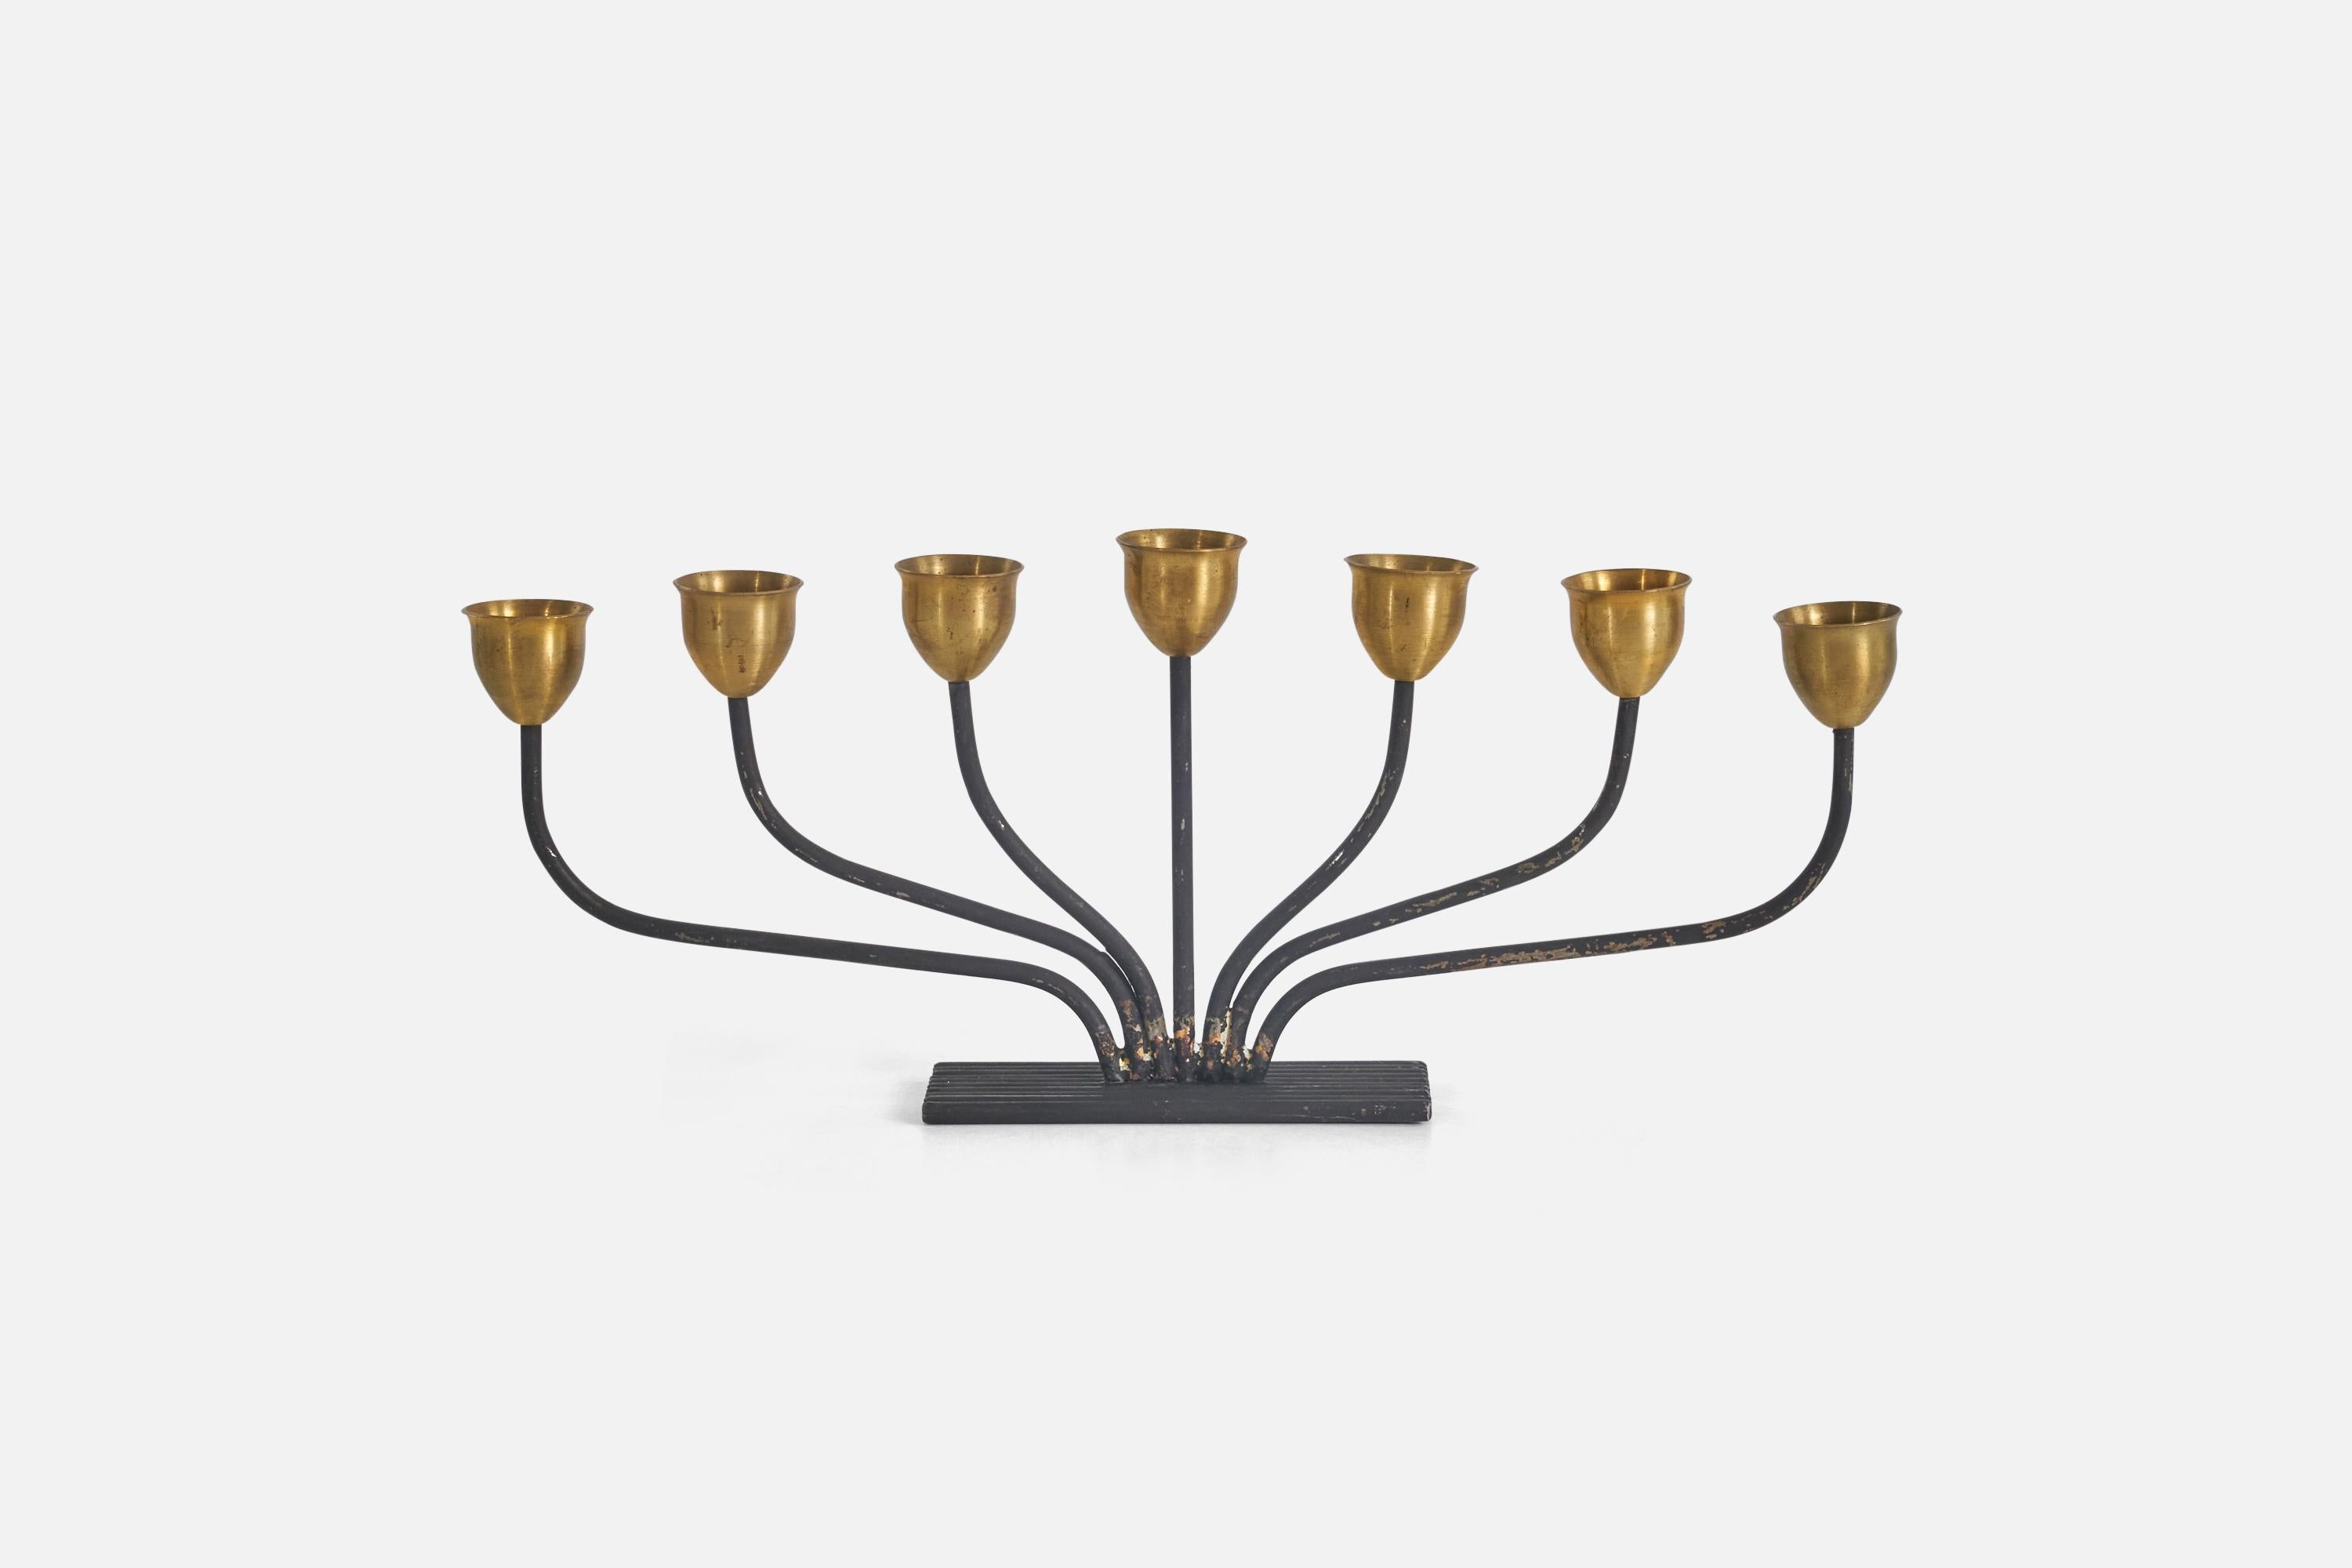 A pair of brass and black-laquered metal candelabra designed by Svend Aage Holm Sørensen and produced by Holm Sørensen Co, Denmark, 1960s.